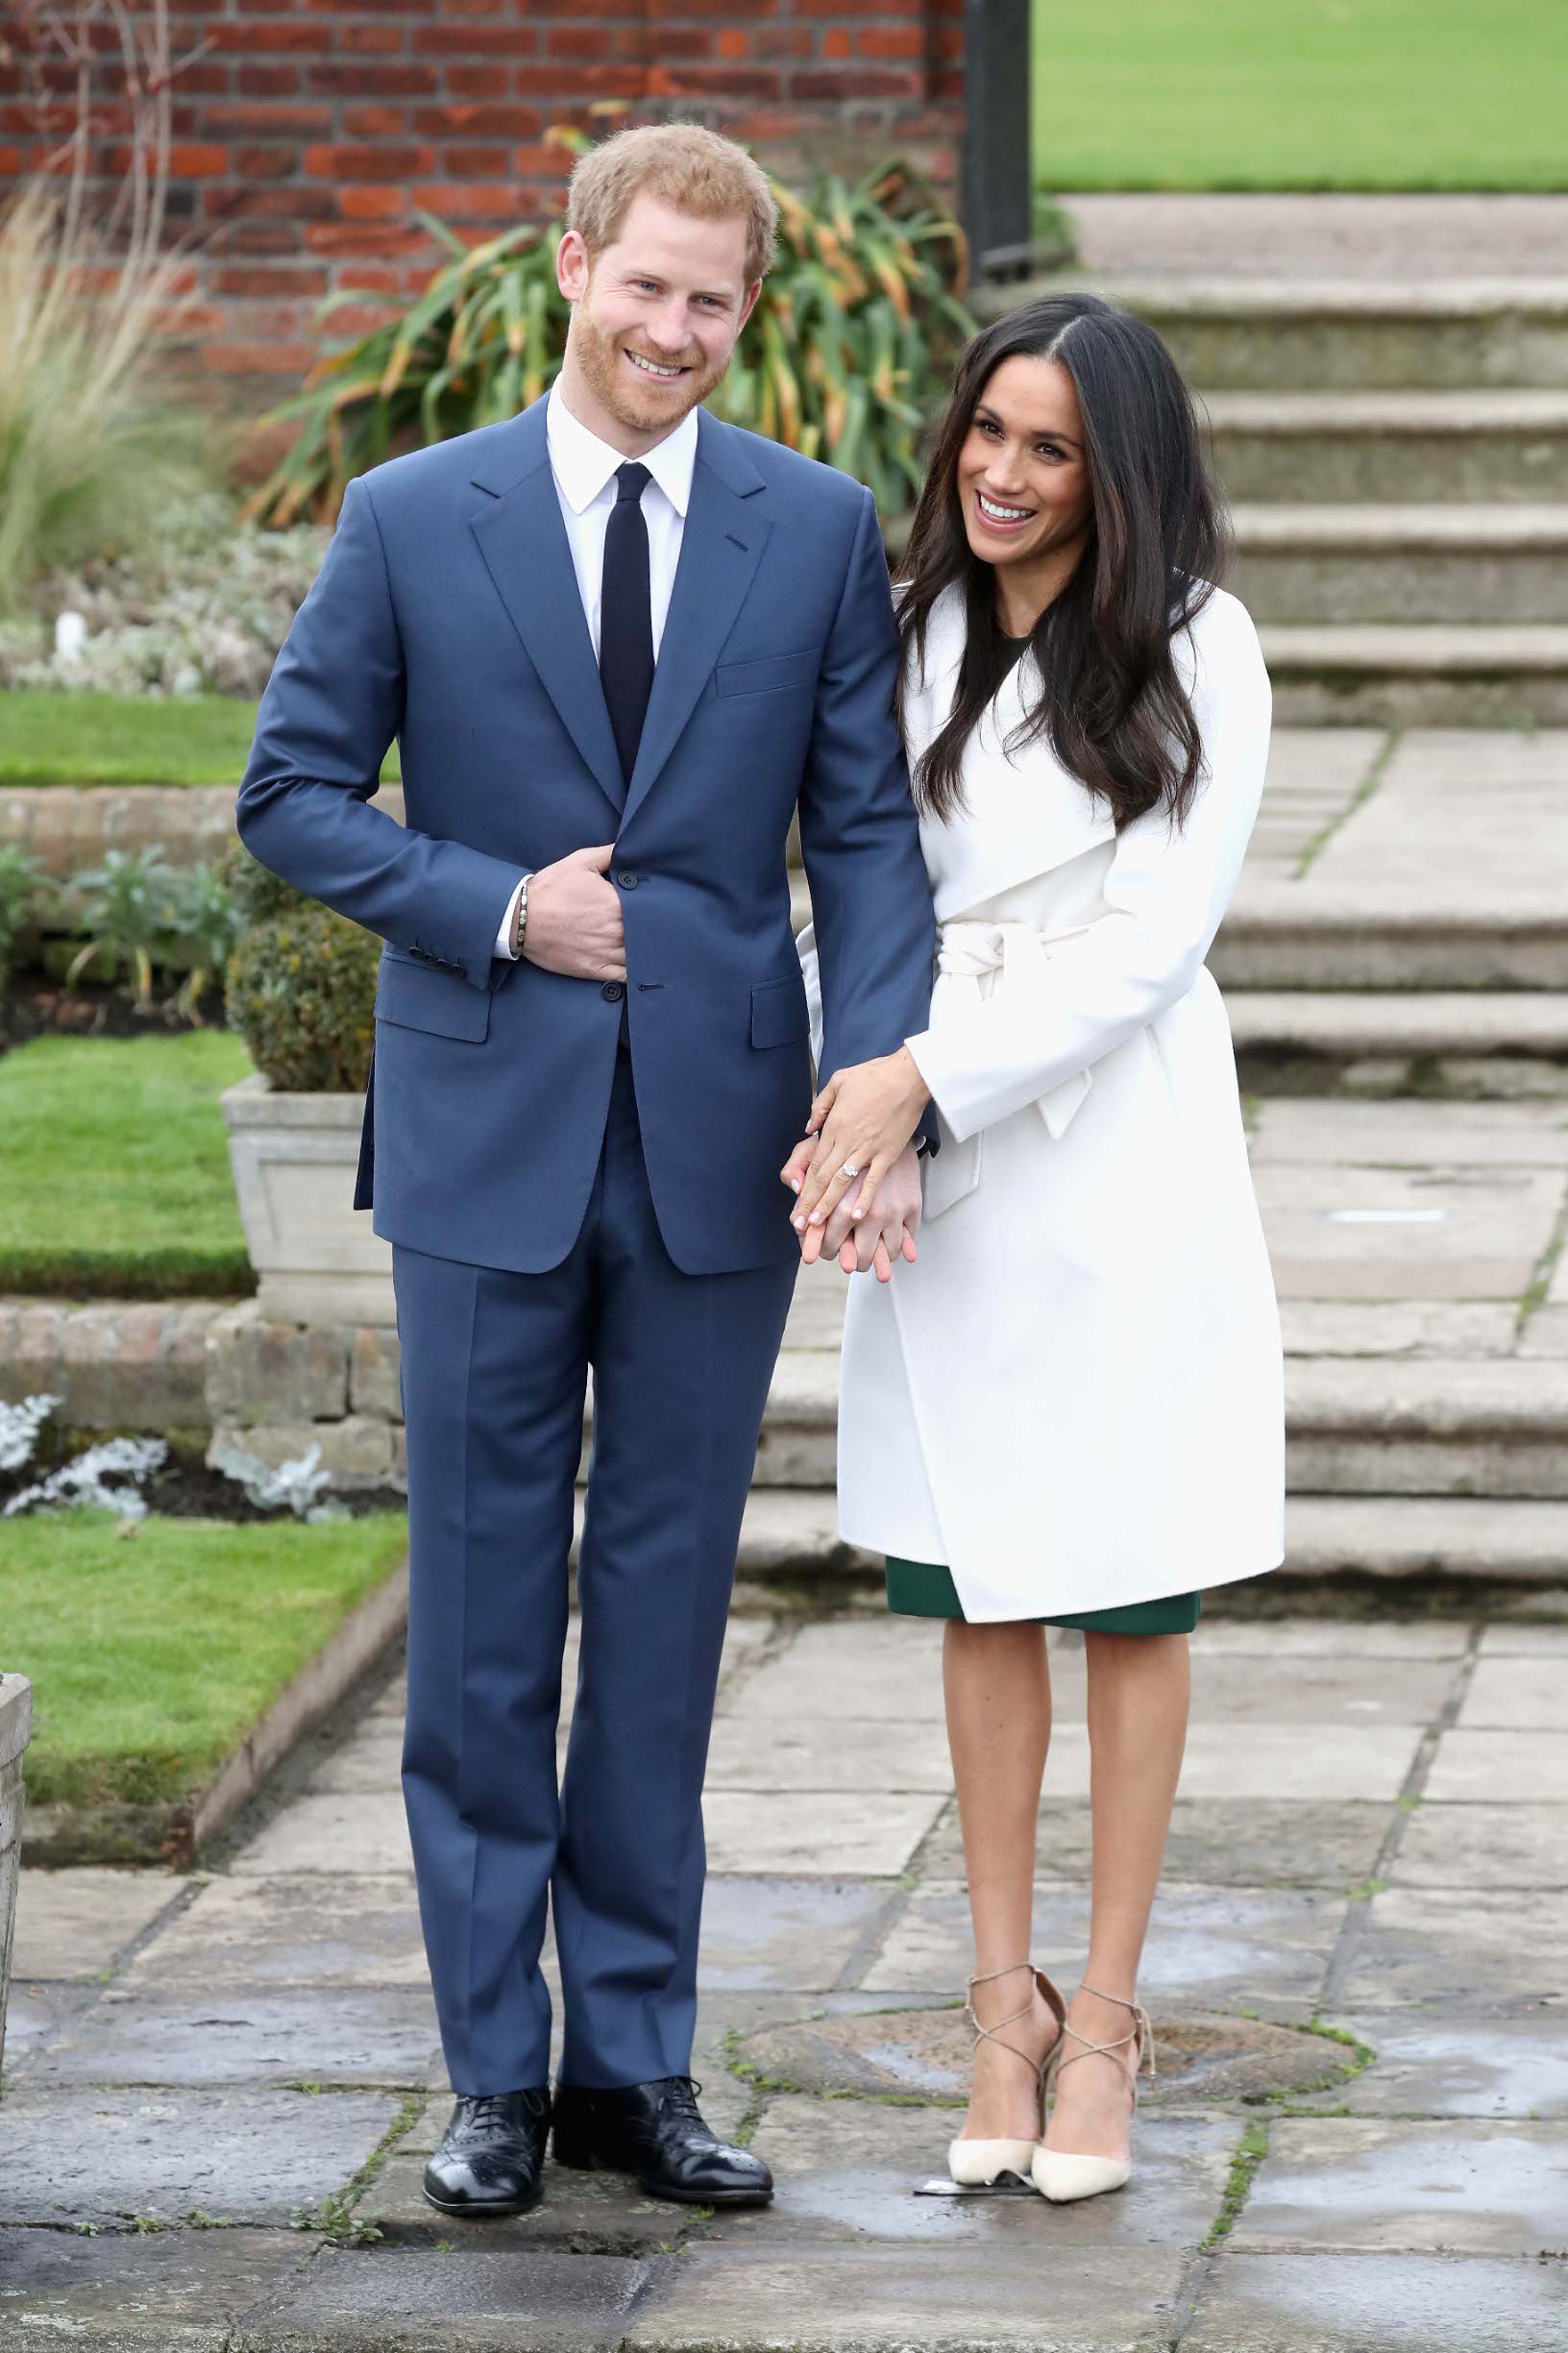 LONDON, ENGLAND - NOVEMBER 27:  Prince Harry and Meghan Markle during an official photocall to announce the engagement of Prince Harry and actress Meghan Markle at The Sunken Gardens at Kensington Palace on November 27, 2017 in London, England.  Prince Harry and Meghan Markle have been a couple officially since November 2016 and are due to marry in Spring 2018.  (Photo by Chris Jackson/Getty Images)